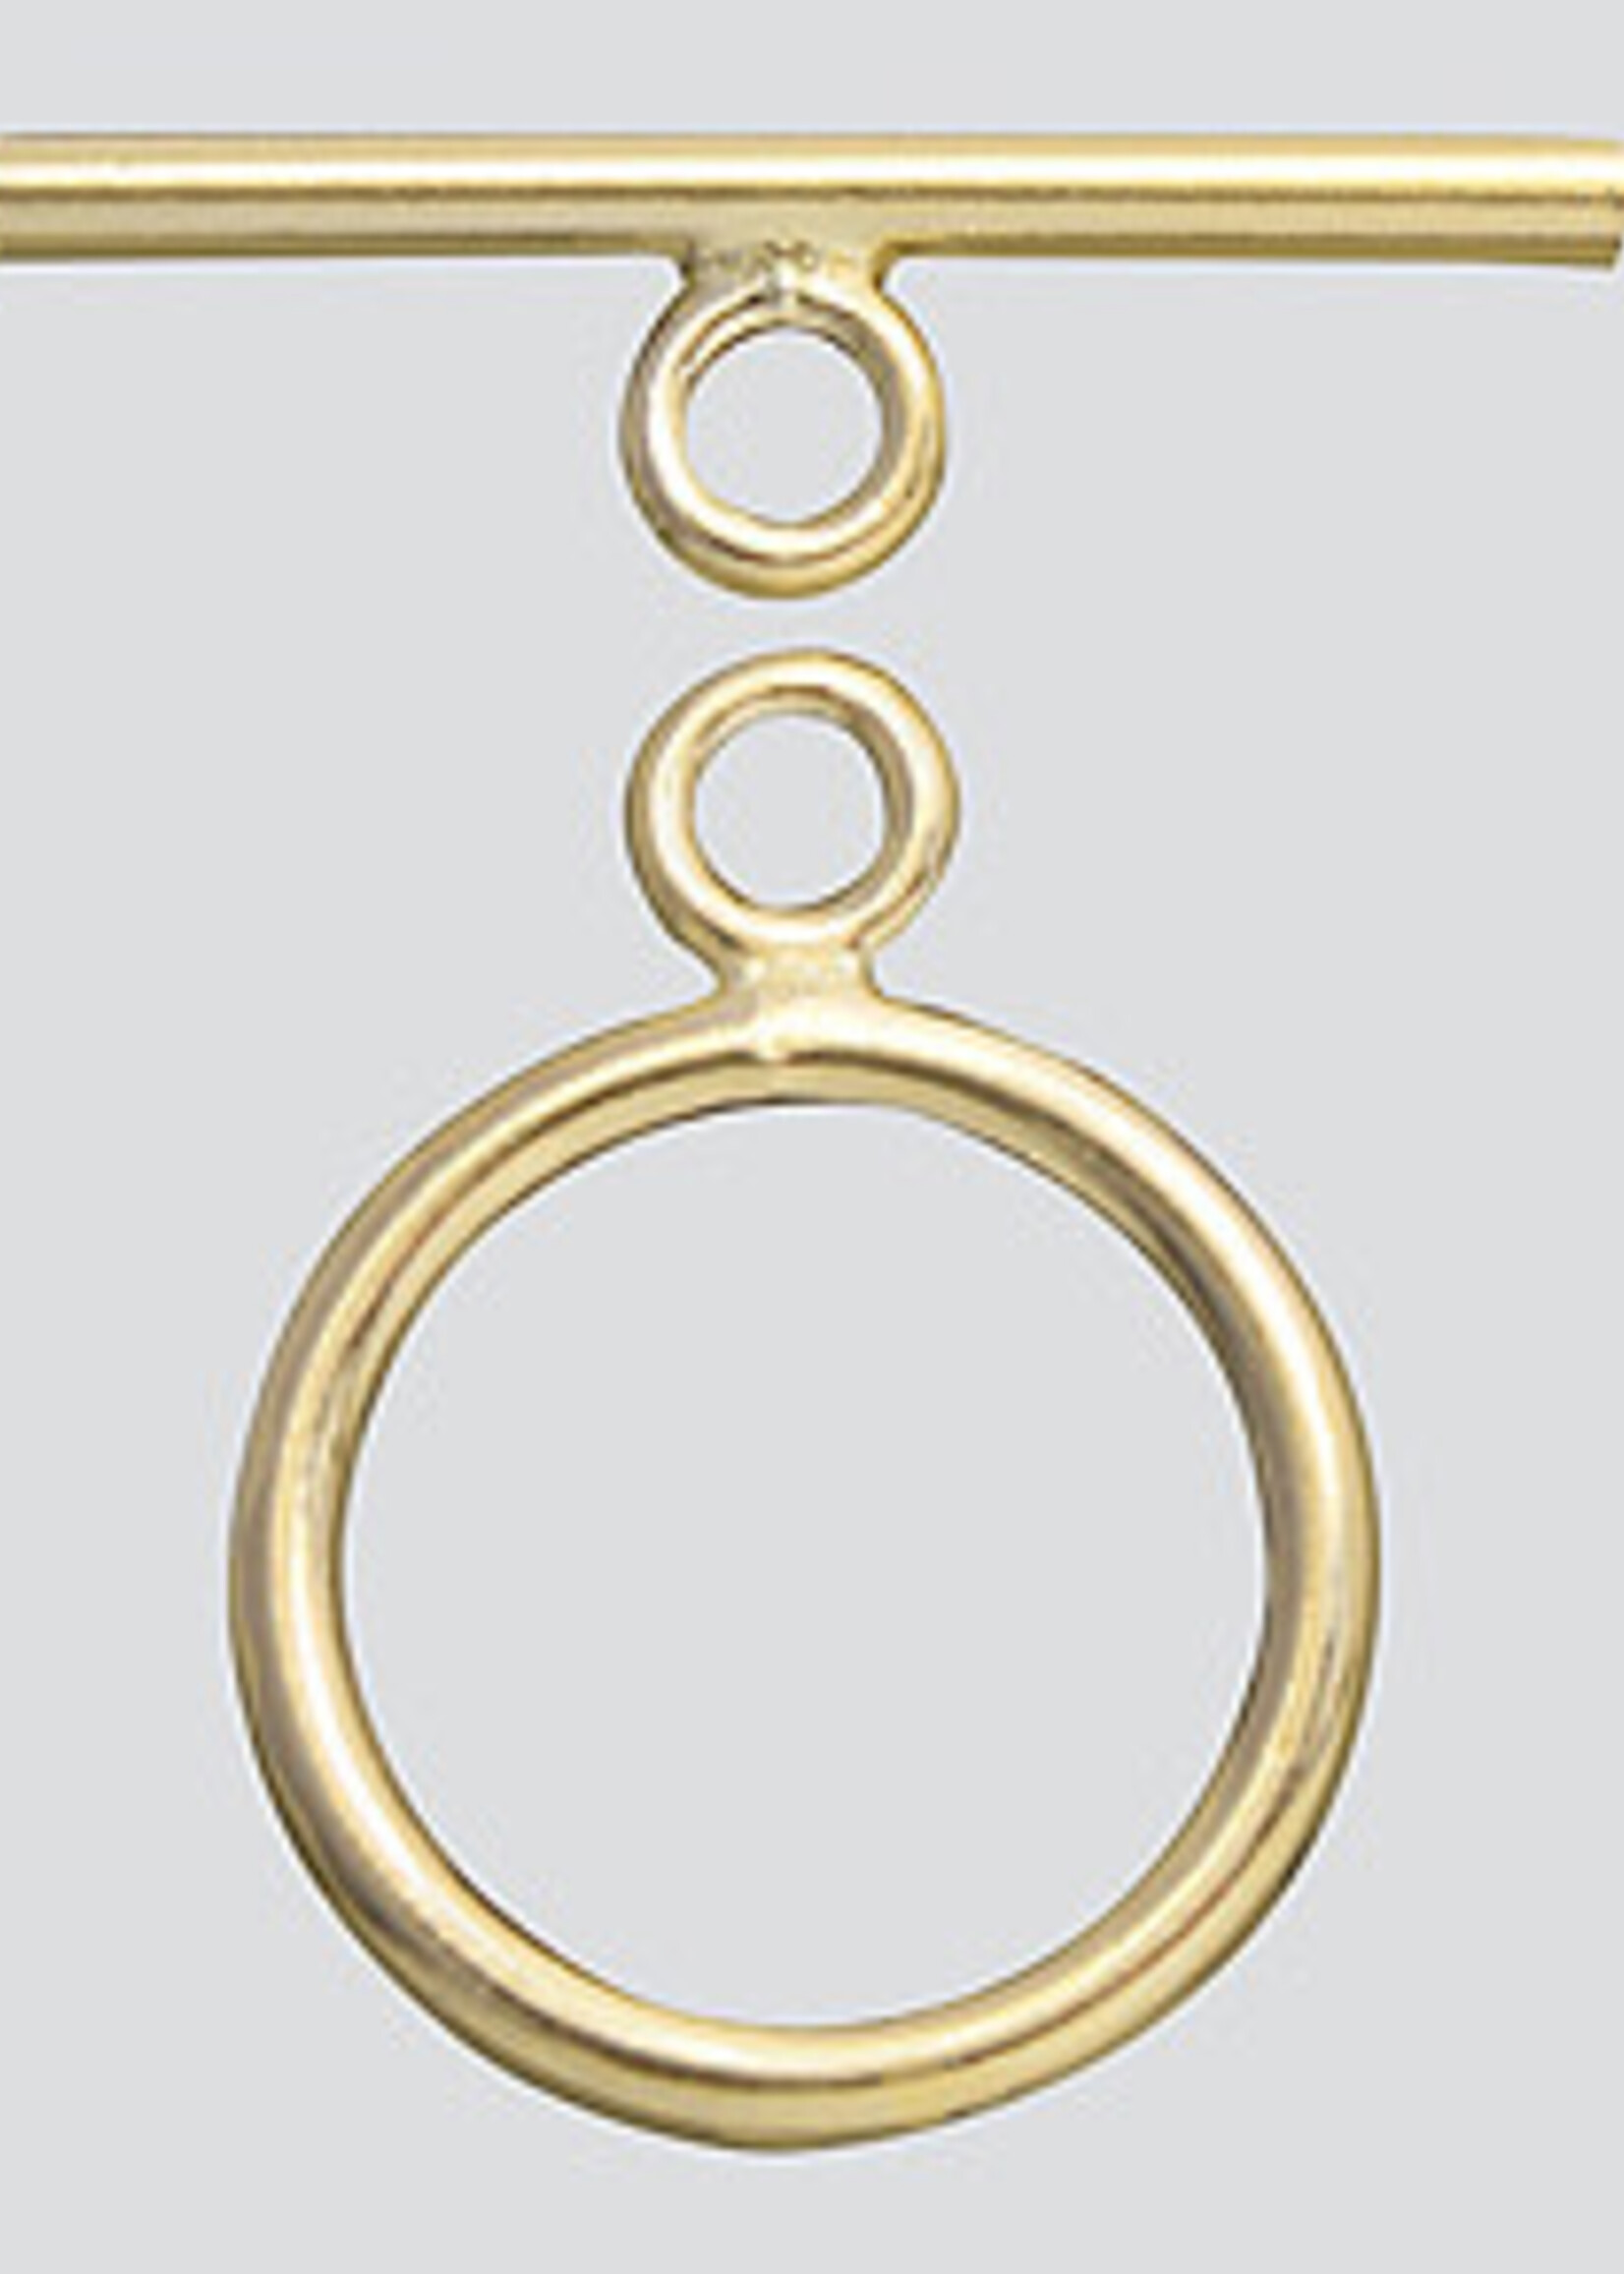 11mm Toggle Clasp 14k Gold Filled ea